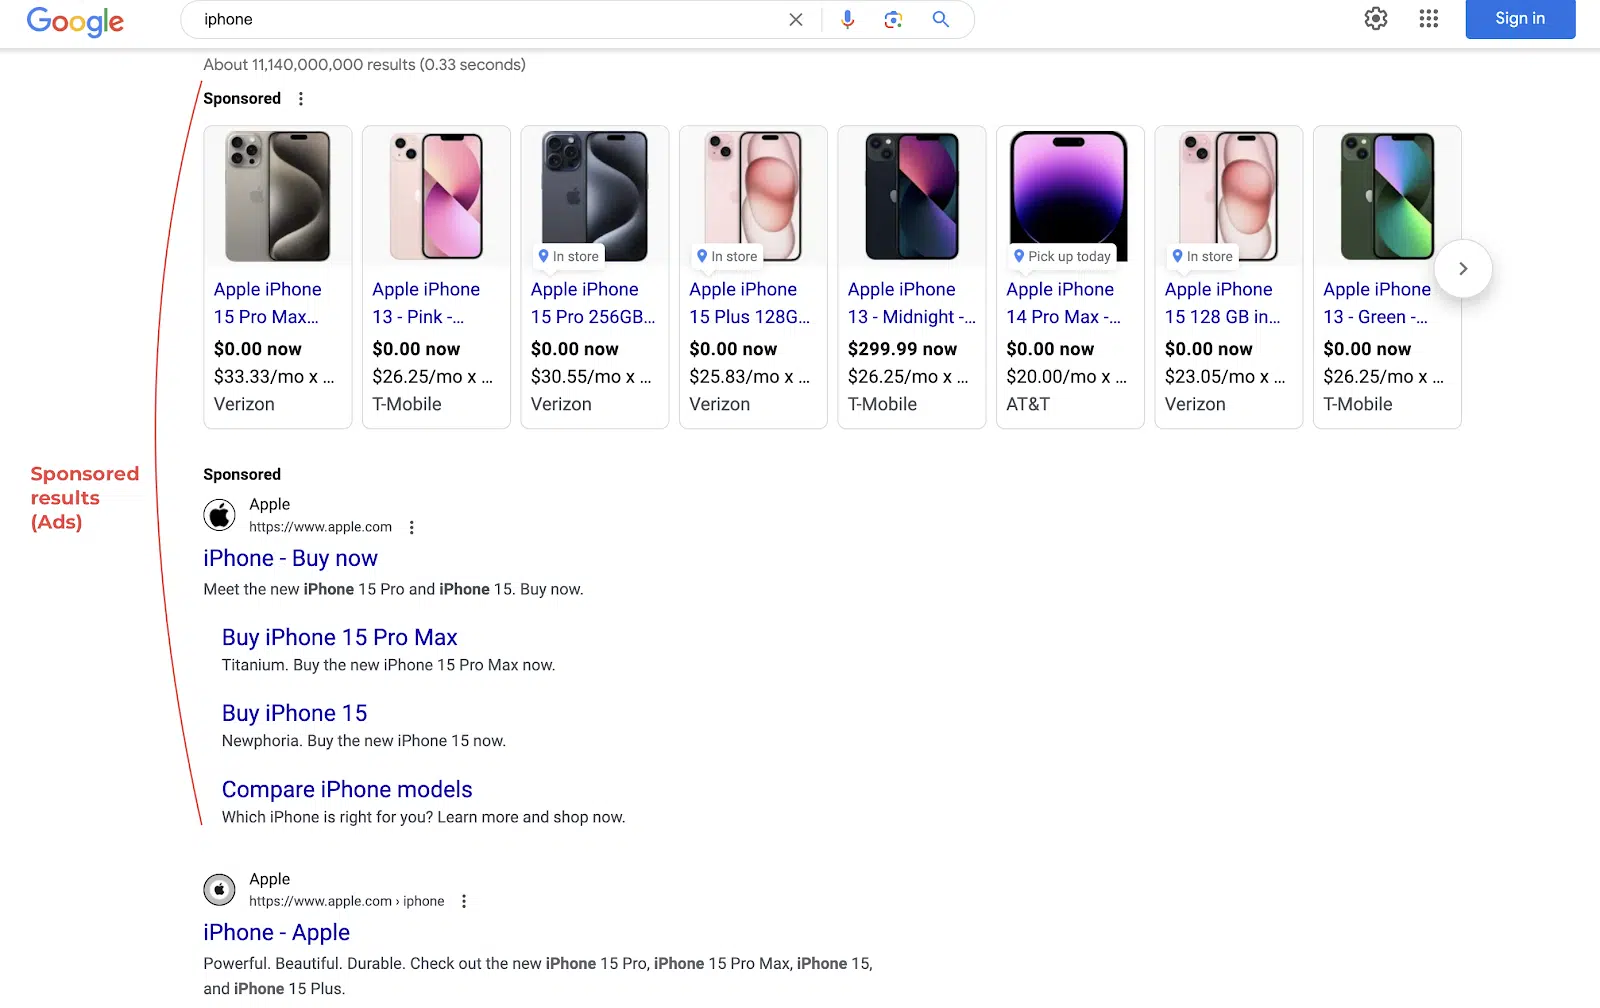 A SERP when looking up “iPhone”